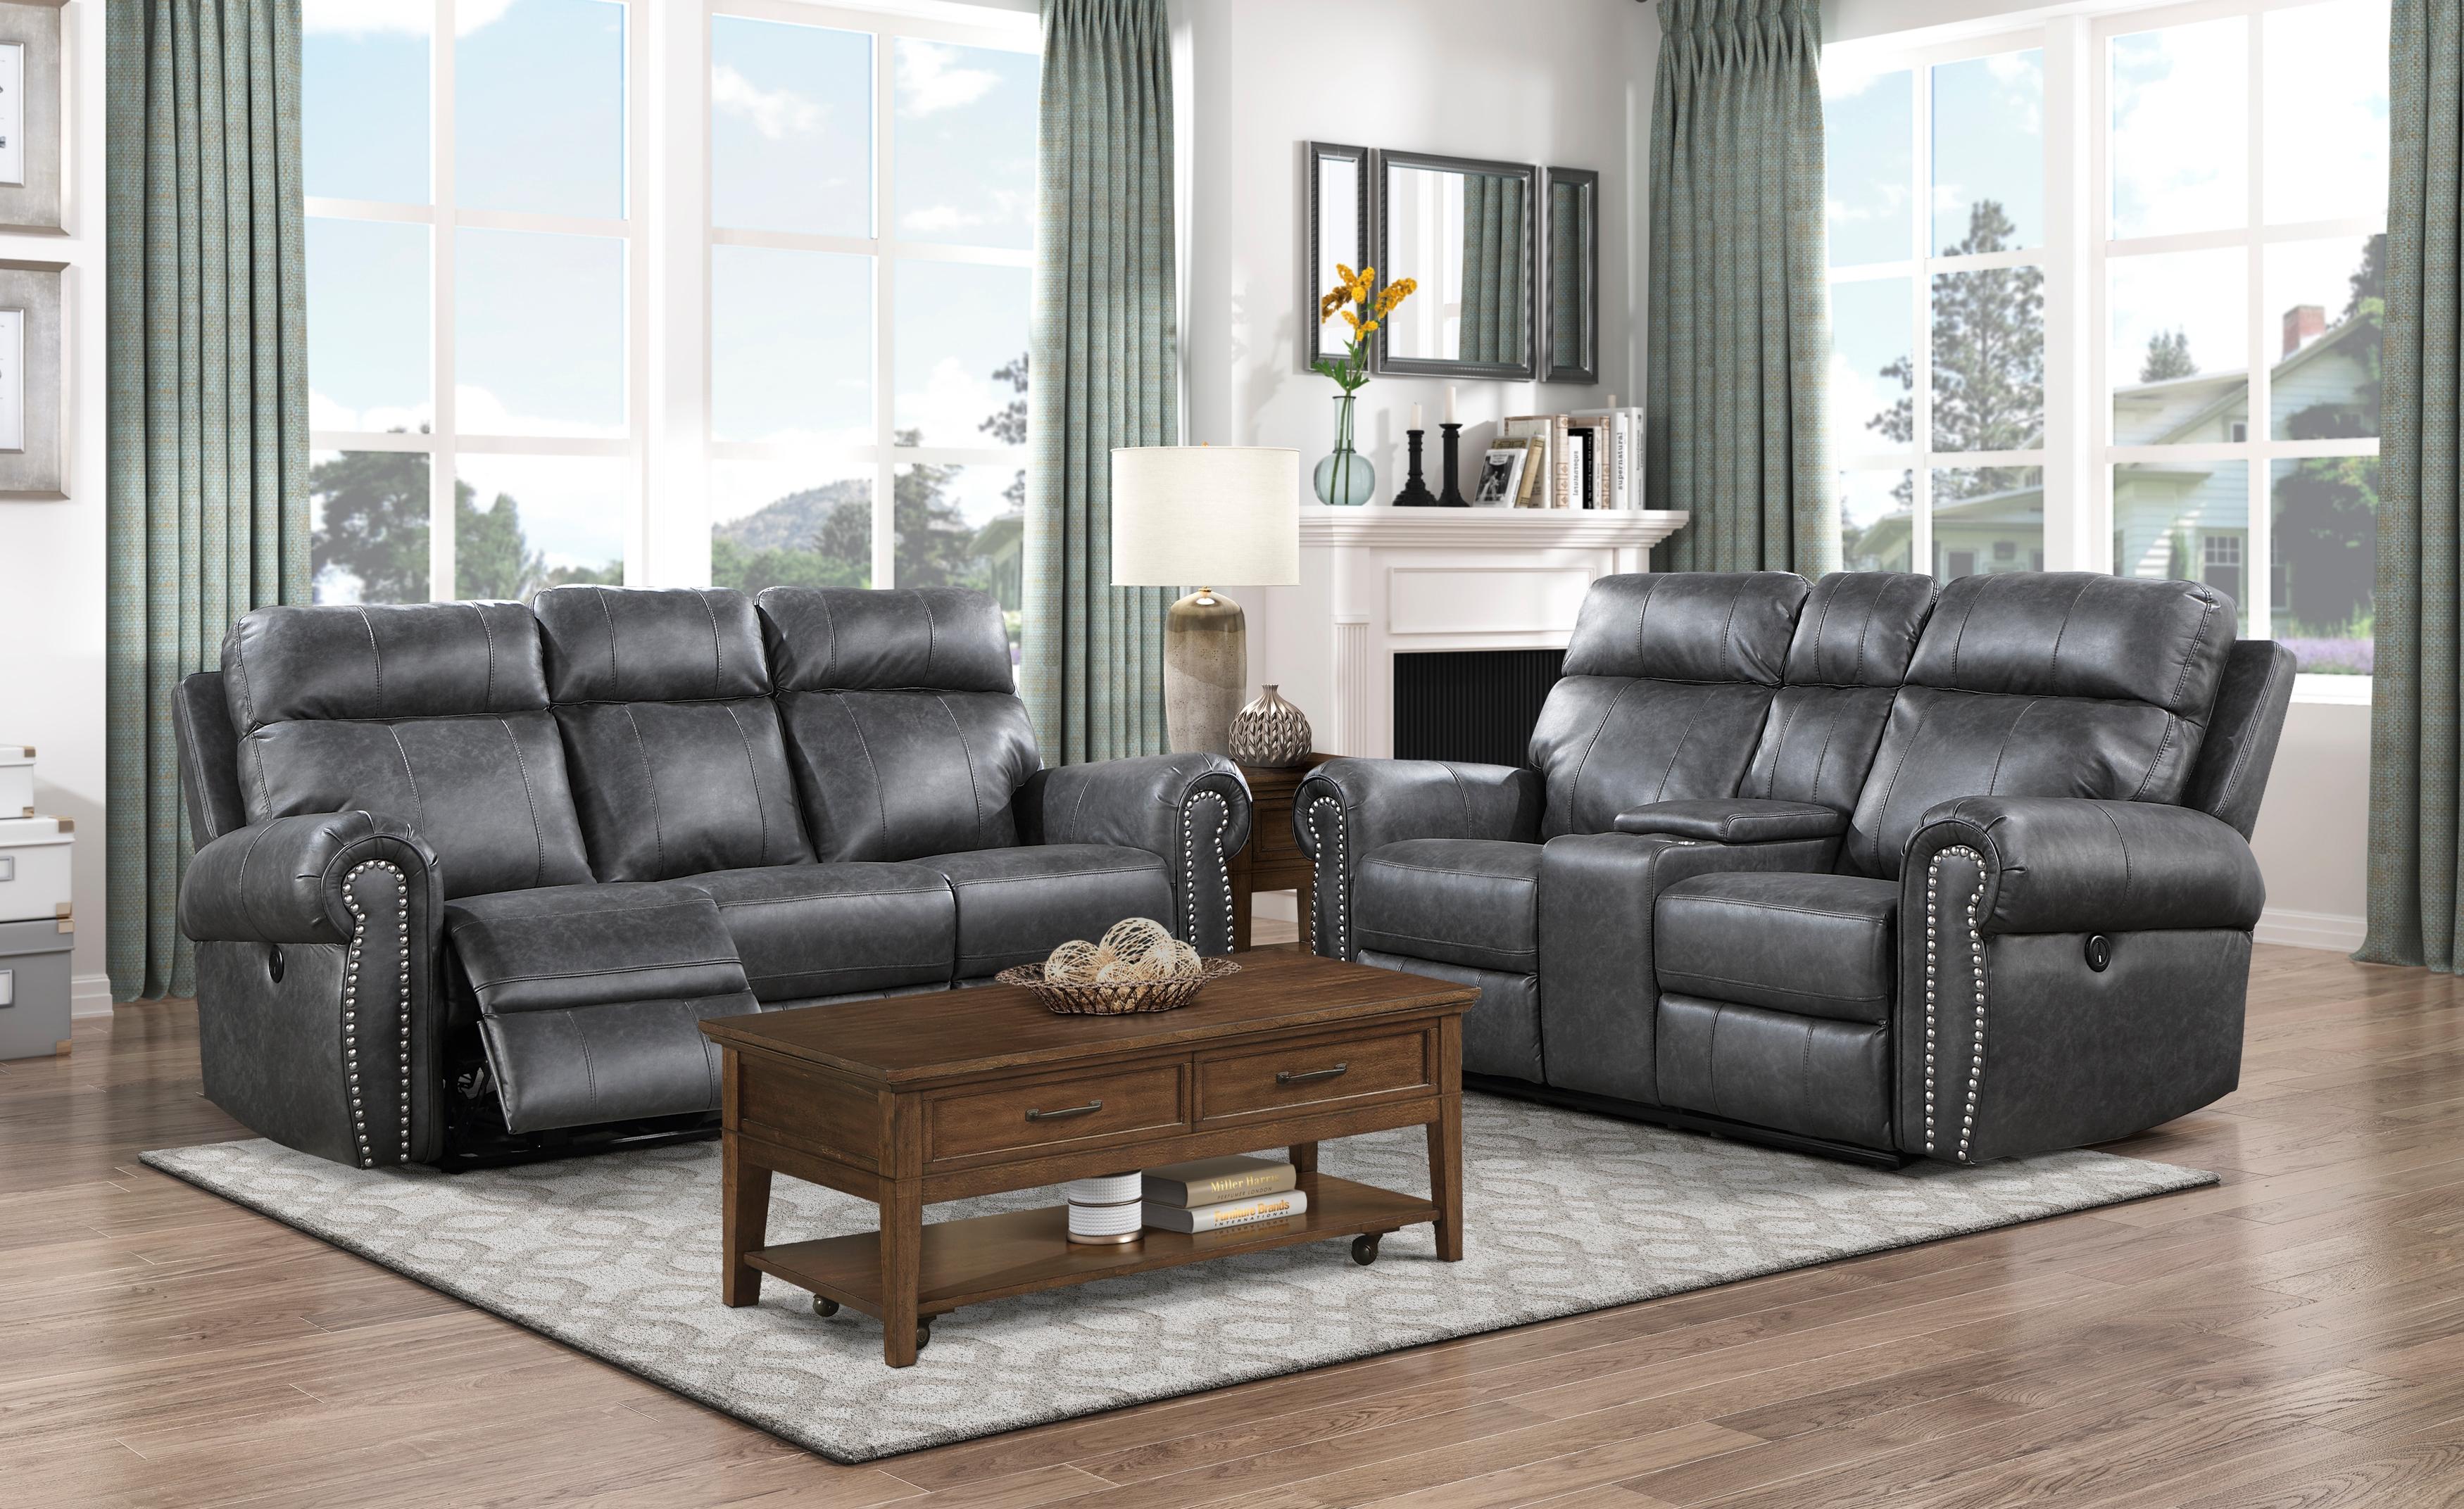 Transitional Power Reclining Set 9488GY-PW-2PC Granville 9488GY-PW-2PC in Gray Suede